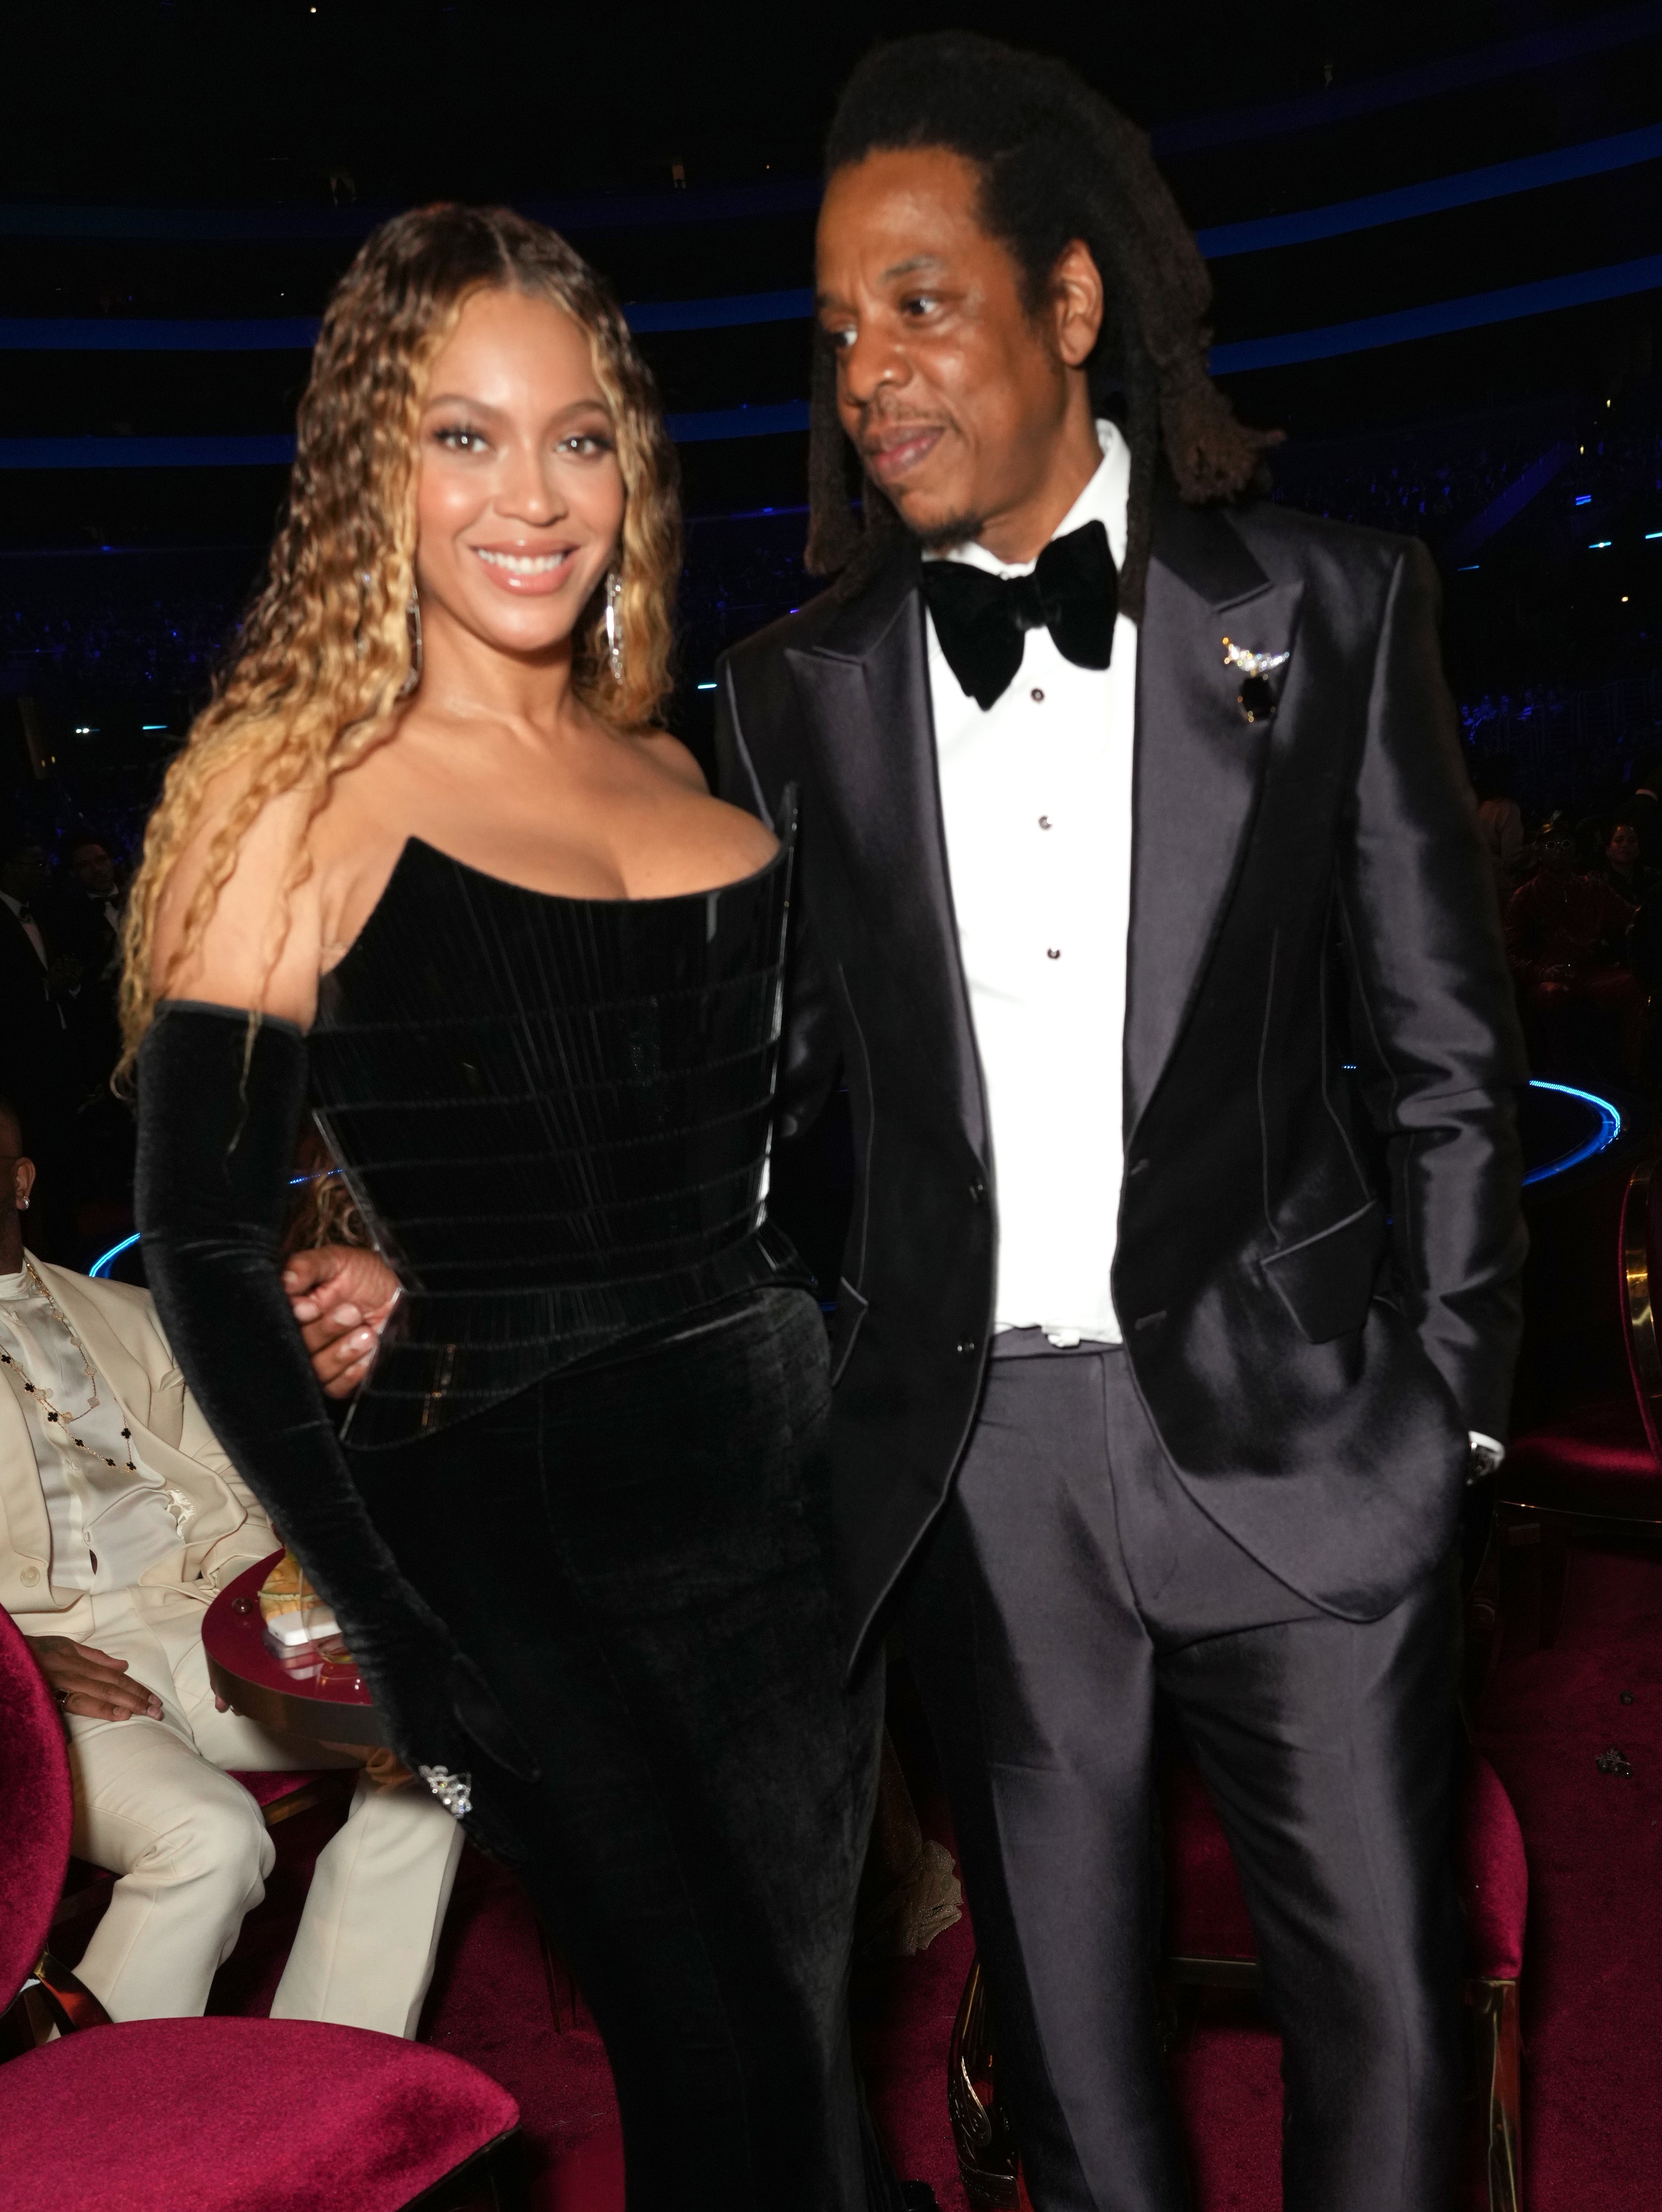 Beyoncé and Jay-Z on the red carpet